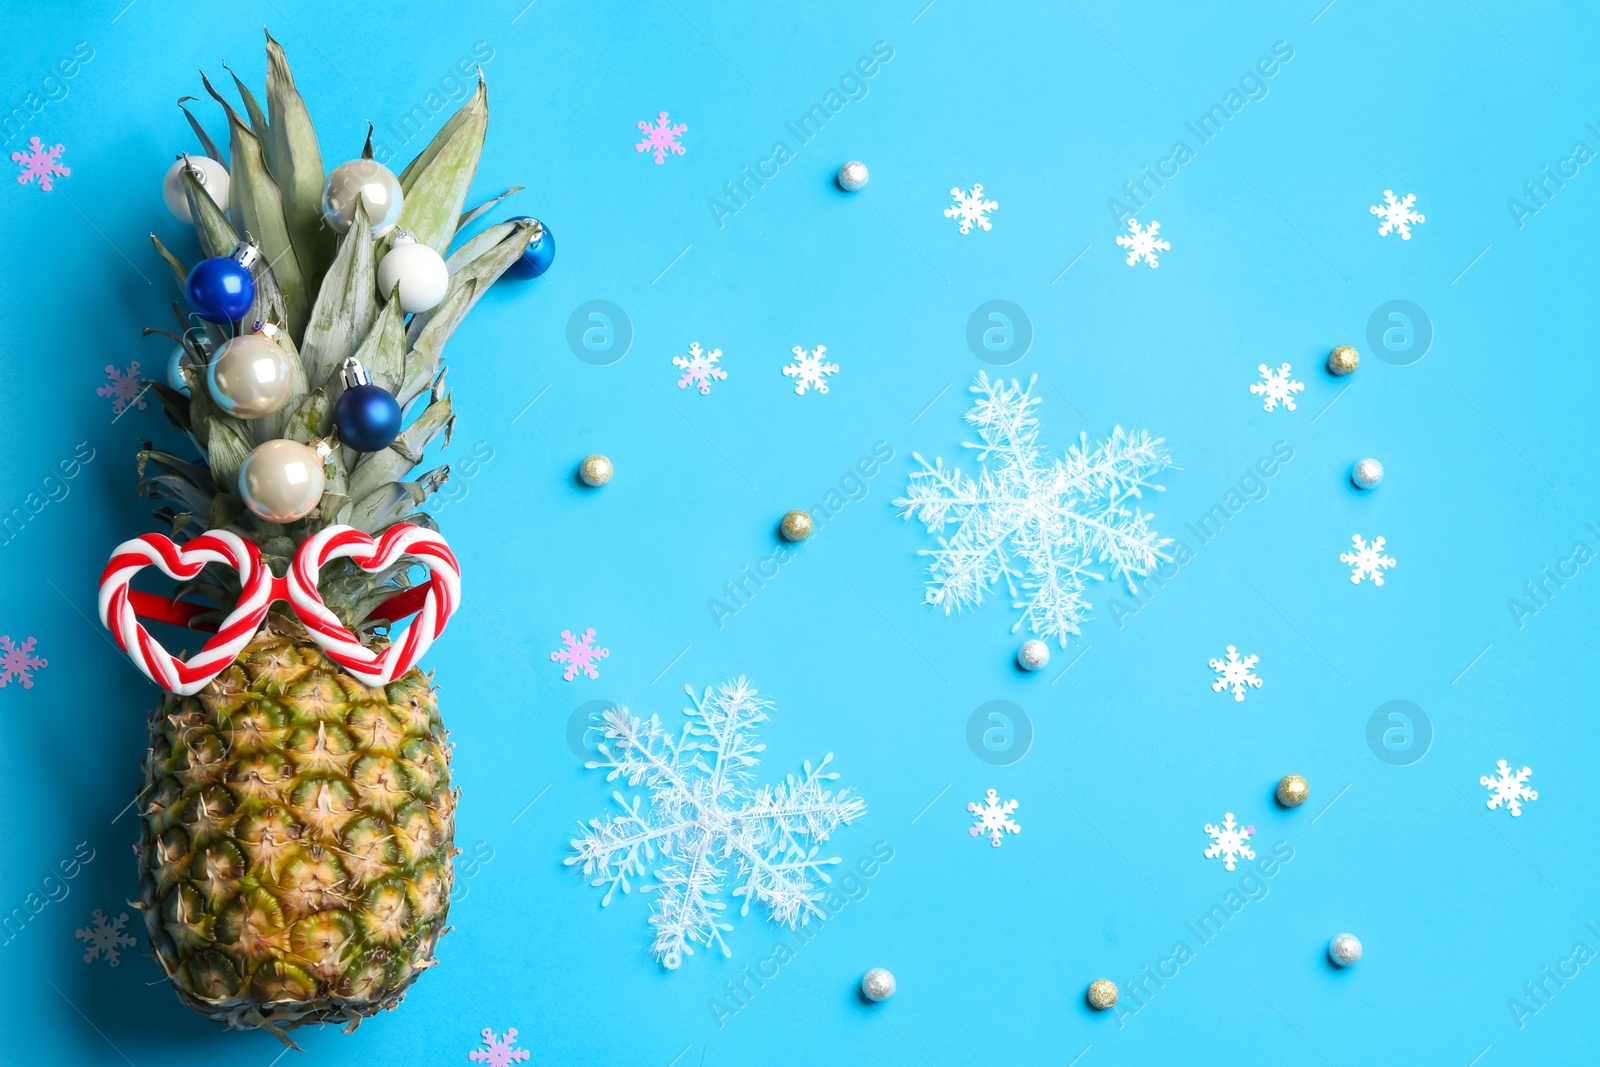 Photo of Pineapple with funny glasses and Christmas decor on light blue background, flat lay. Creative concept